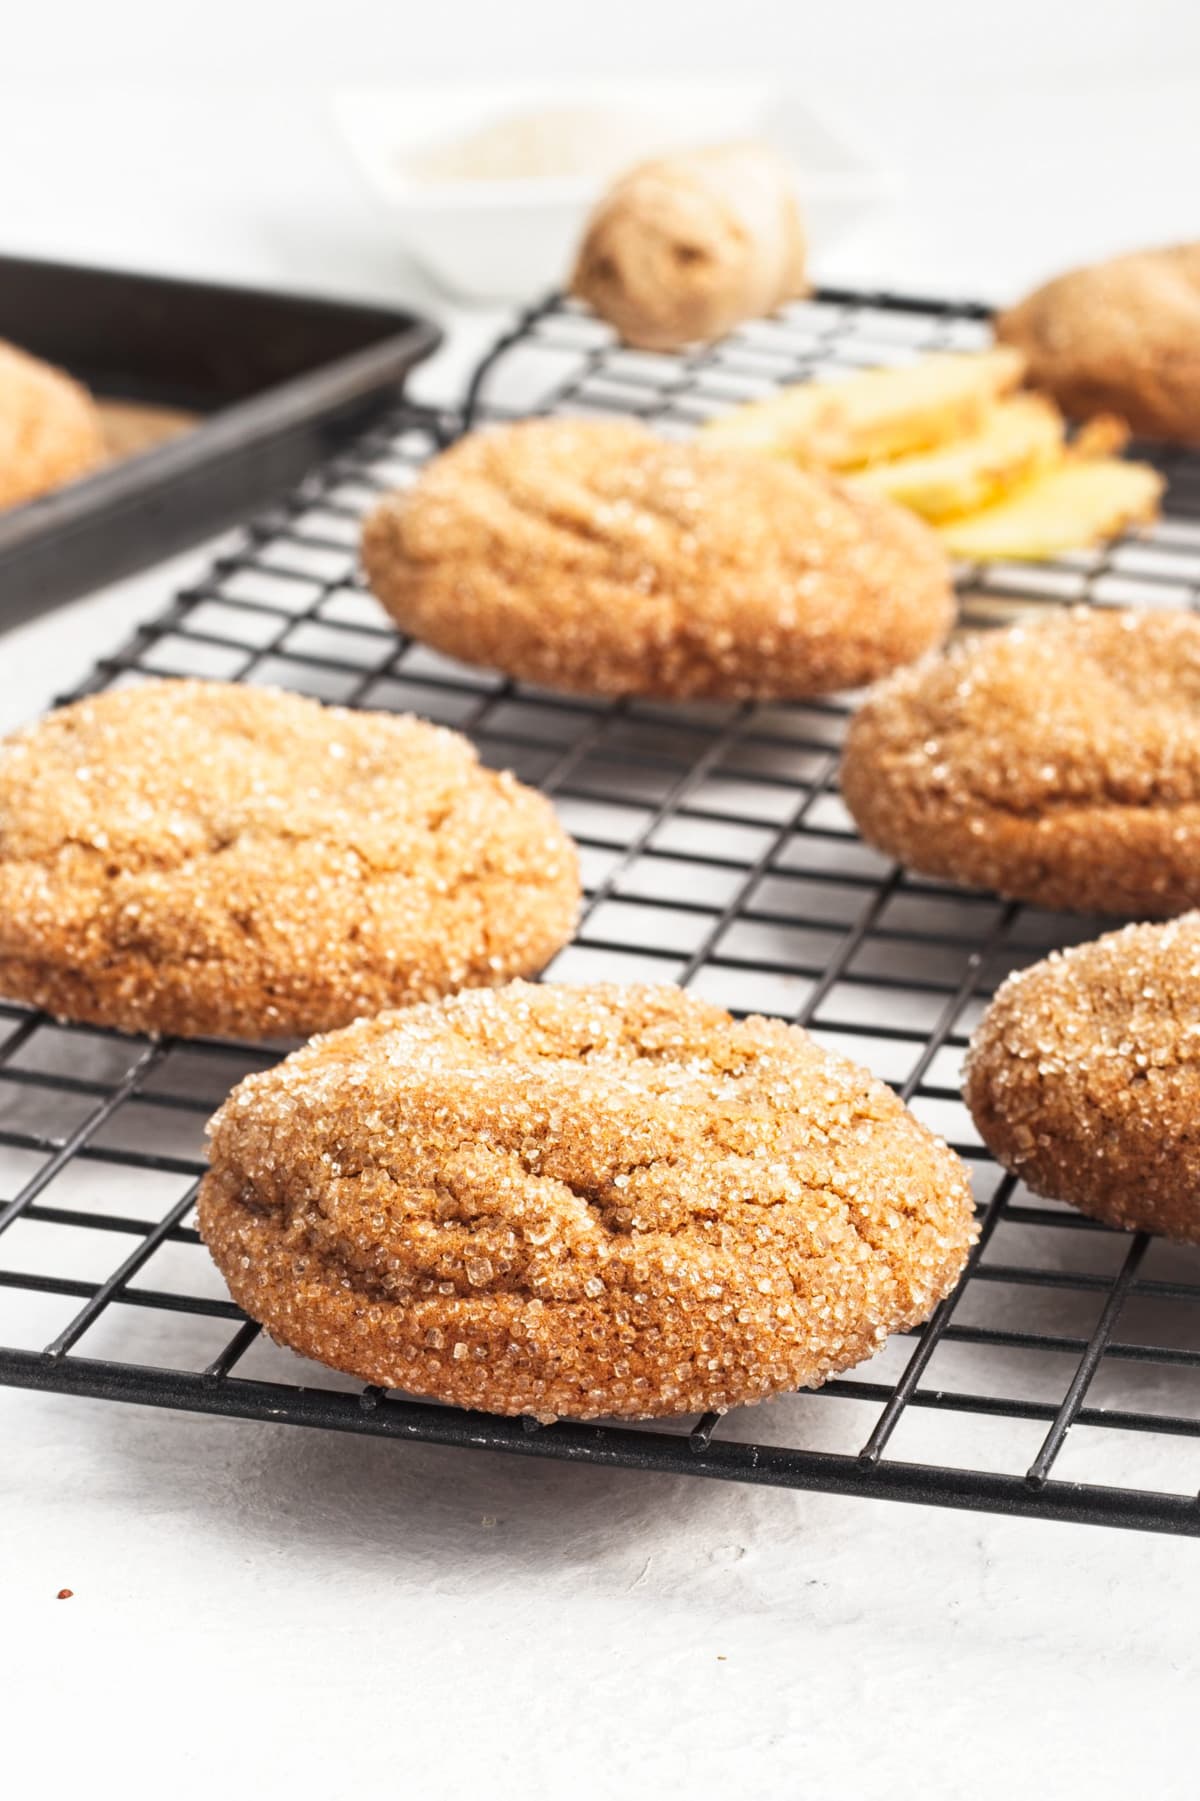 The crunchy sugar coating of the cookie can be seen as it cools on a wire rack.